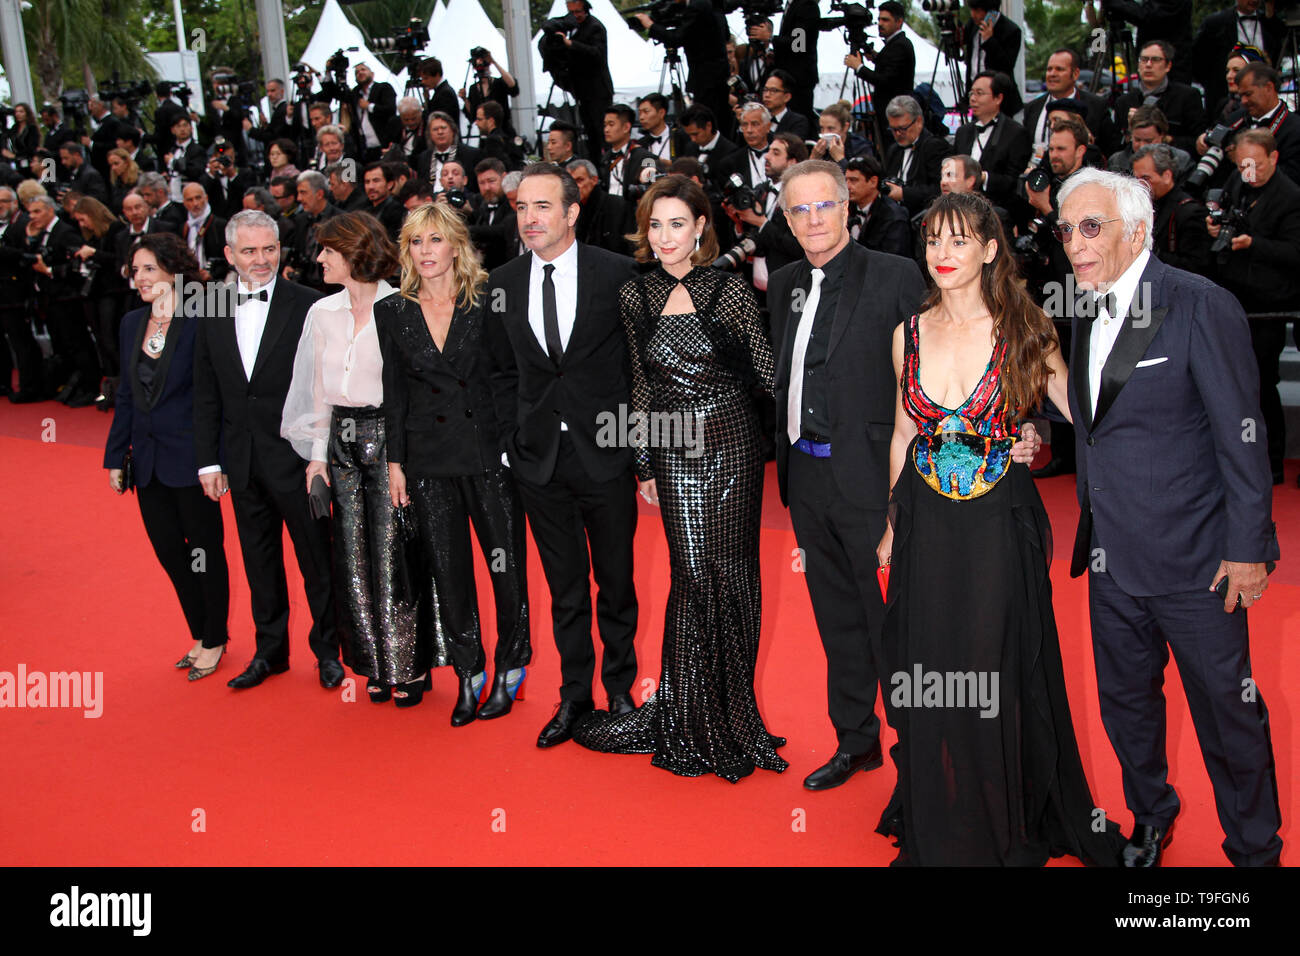 Cannes, France. 18th May, 2019. Mathilde Seignier, Jean Dujardin, Elsa Zilberstein, Christophe Lambert, Gerard Darmon, Irene Jacob and Audrey Dana  arrives to the premiere of 'LES PLUS BELLES ANNÉES D’UNE VIE' during the 2019 Cannes Film Festival on May 18, 2019 at Palais des Festivals in Cannes, France. Credit: Imagespace/Alamy Live News Stock Photo